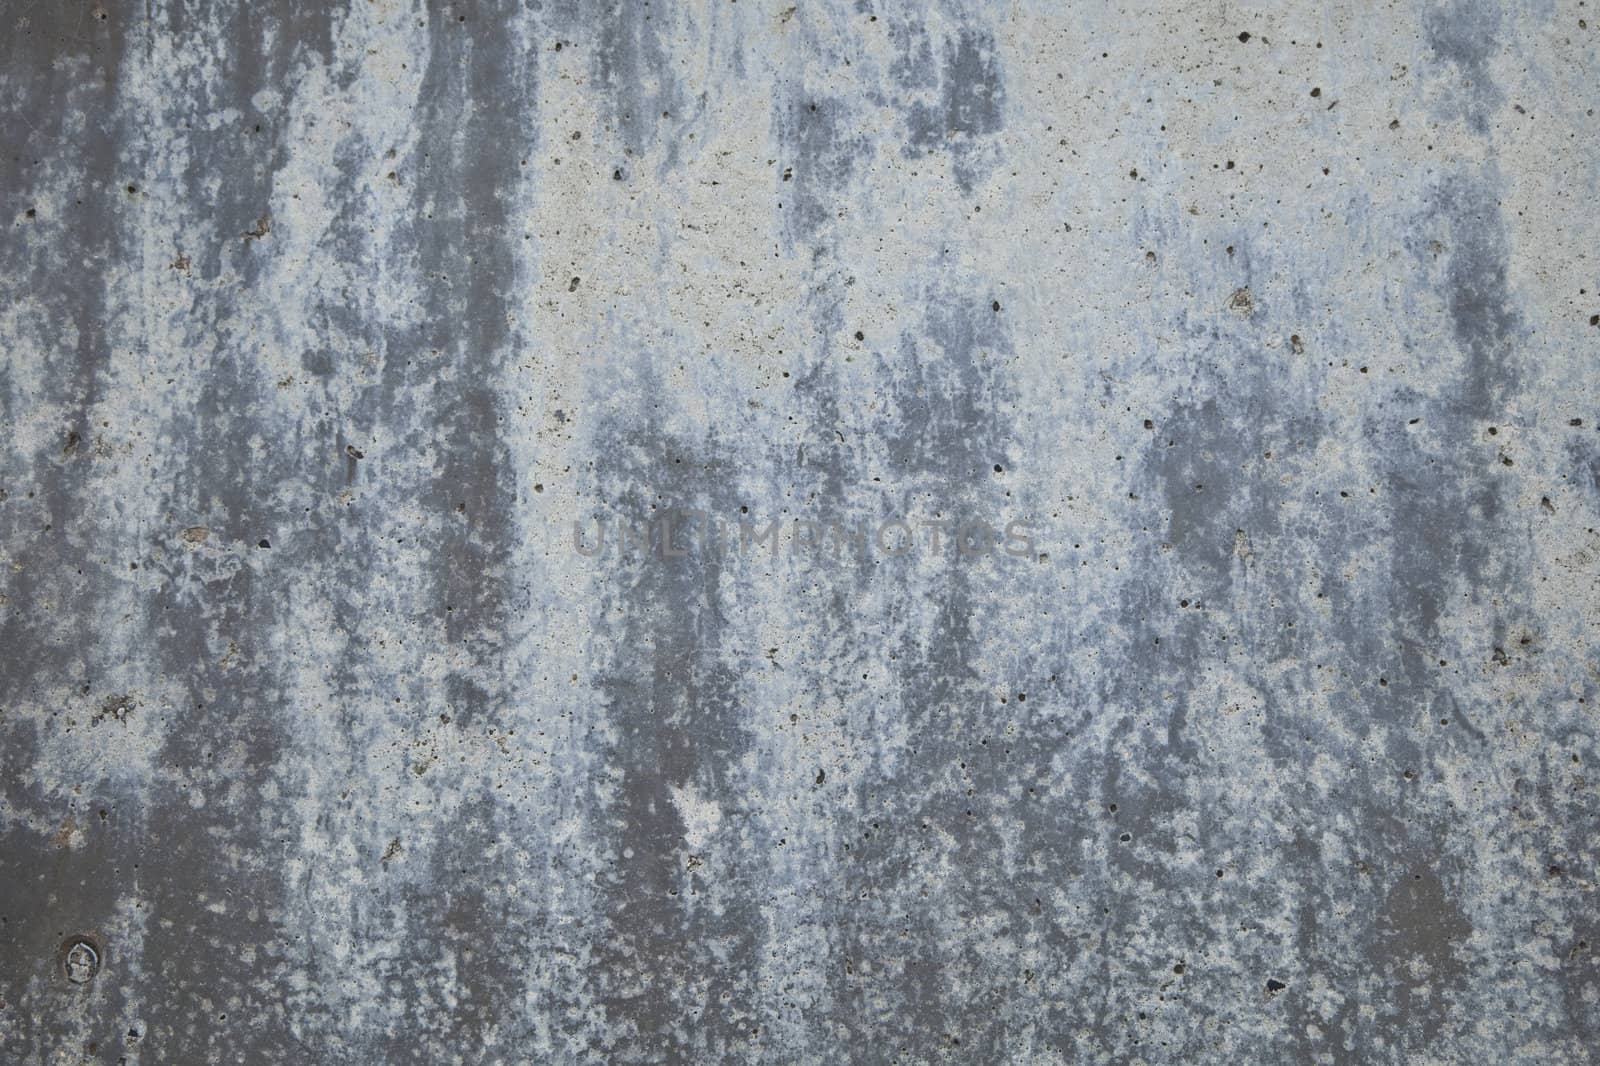 Grungy and weathered old concrete background photo
